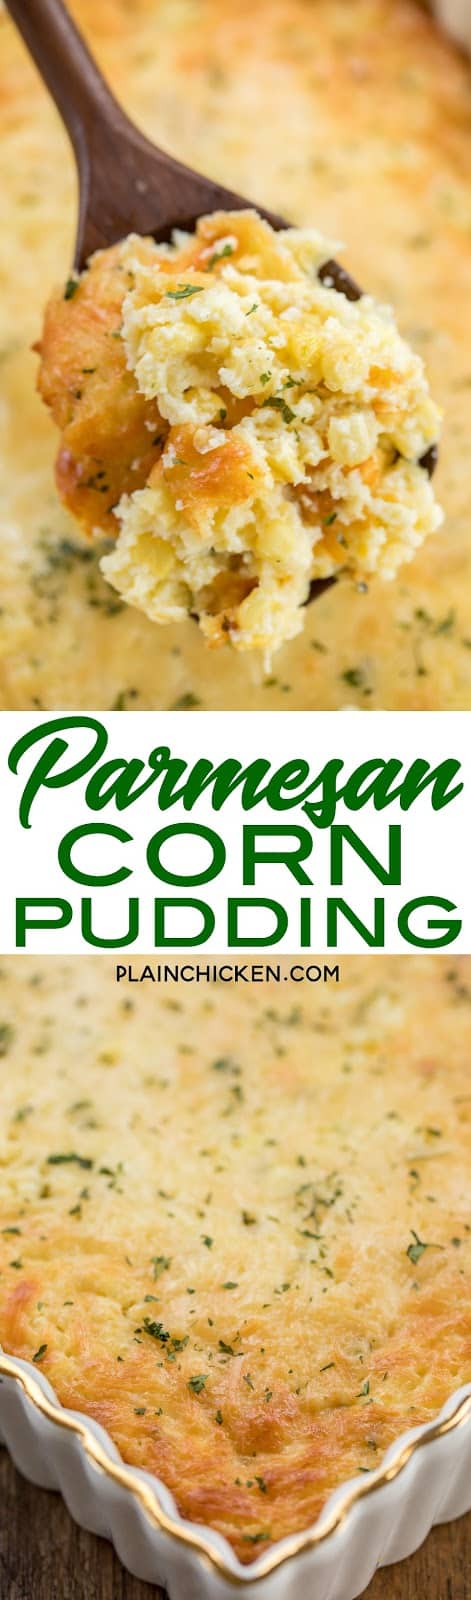 Parmesan Corn Pudding - an easy and delicious side dish! We make this at least once a month!! SO good!! Frozen corn, sugar, flour, cornmeal, butter, milk, eggs and Parmesan cheese. Can make ahead and refrigerate or freeze for later. Everyone LOVES this yummy casserole! #casserole #sidedish #freezermeal #cornpudding